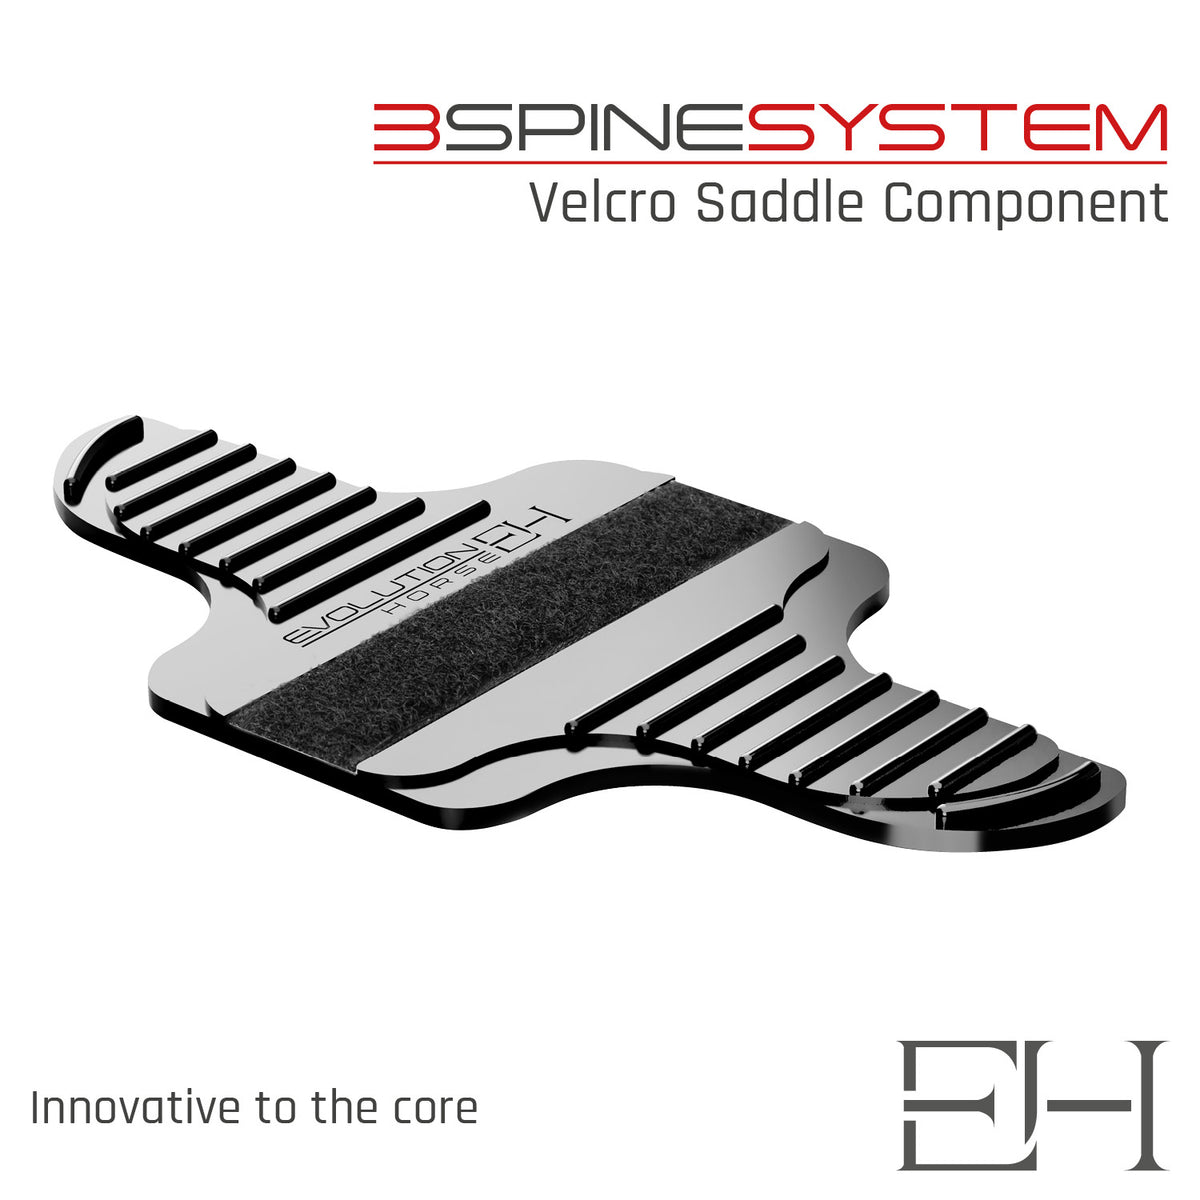 velcro board, parts of saddle western – Teaching Aids for EAS